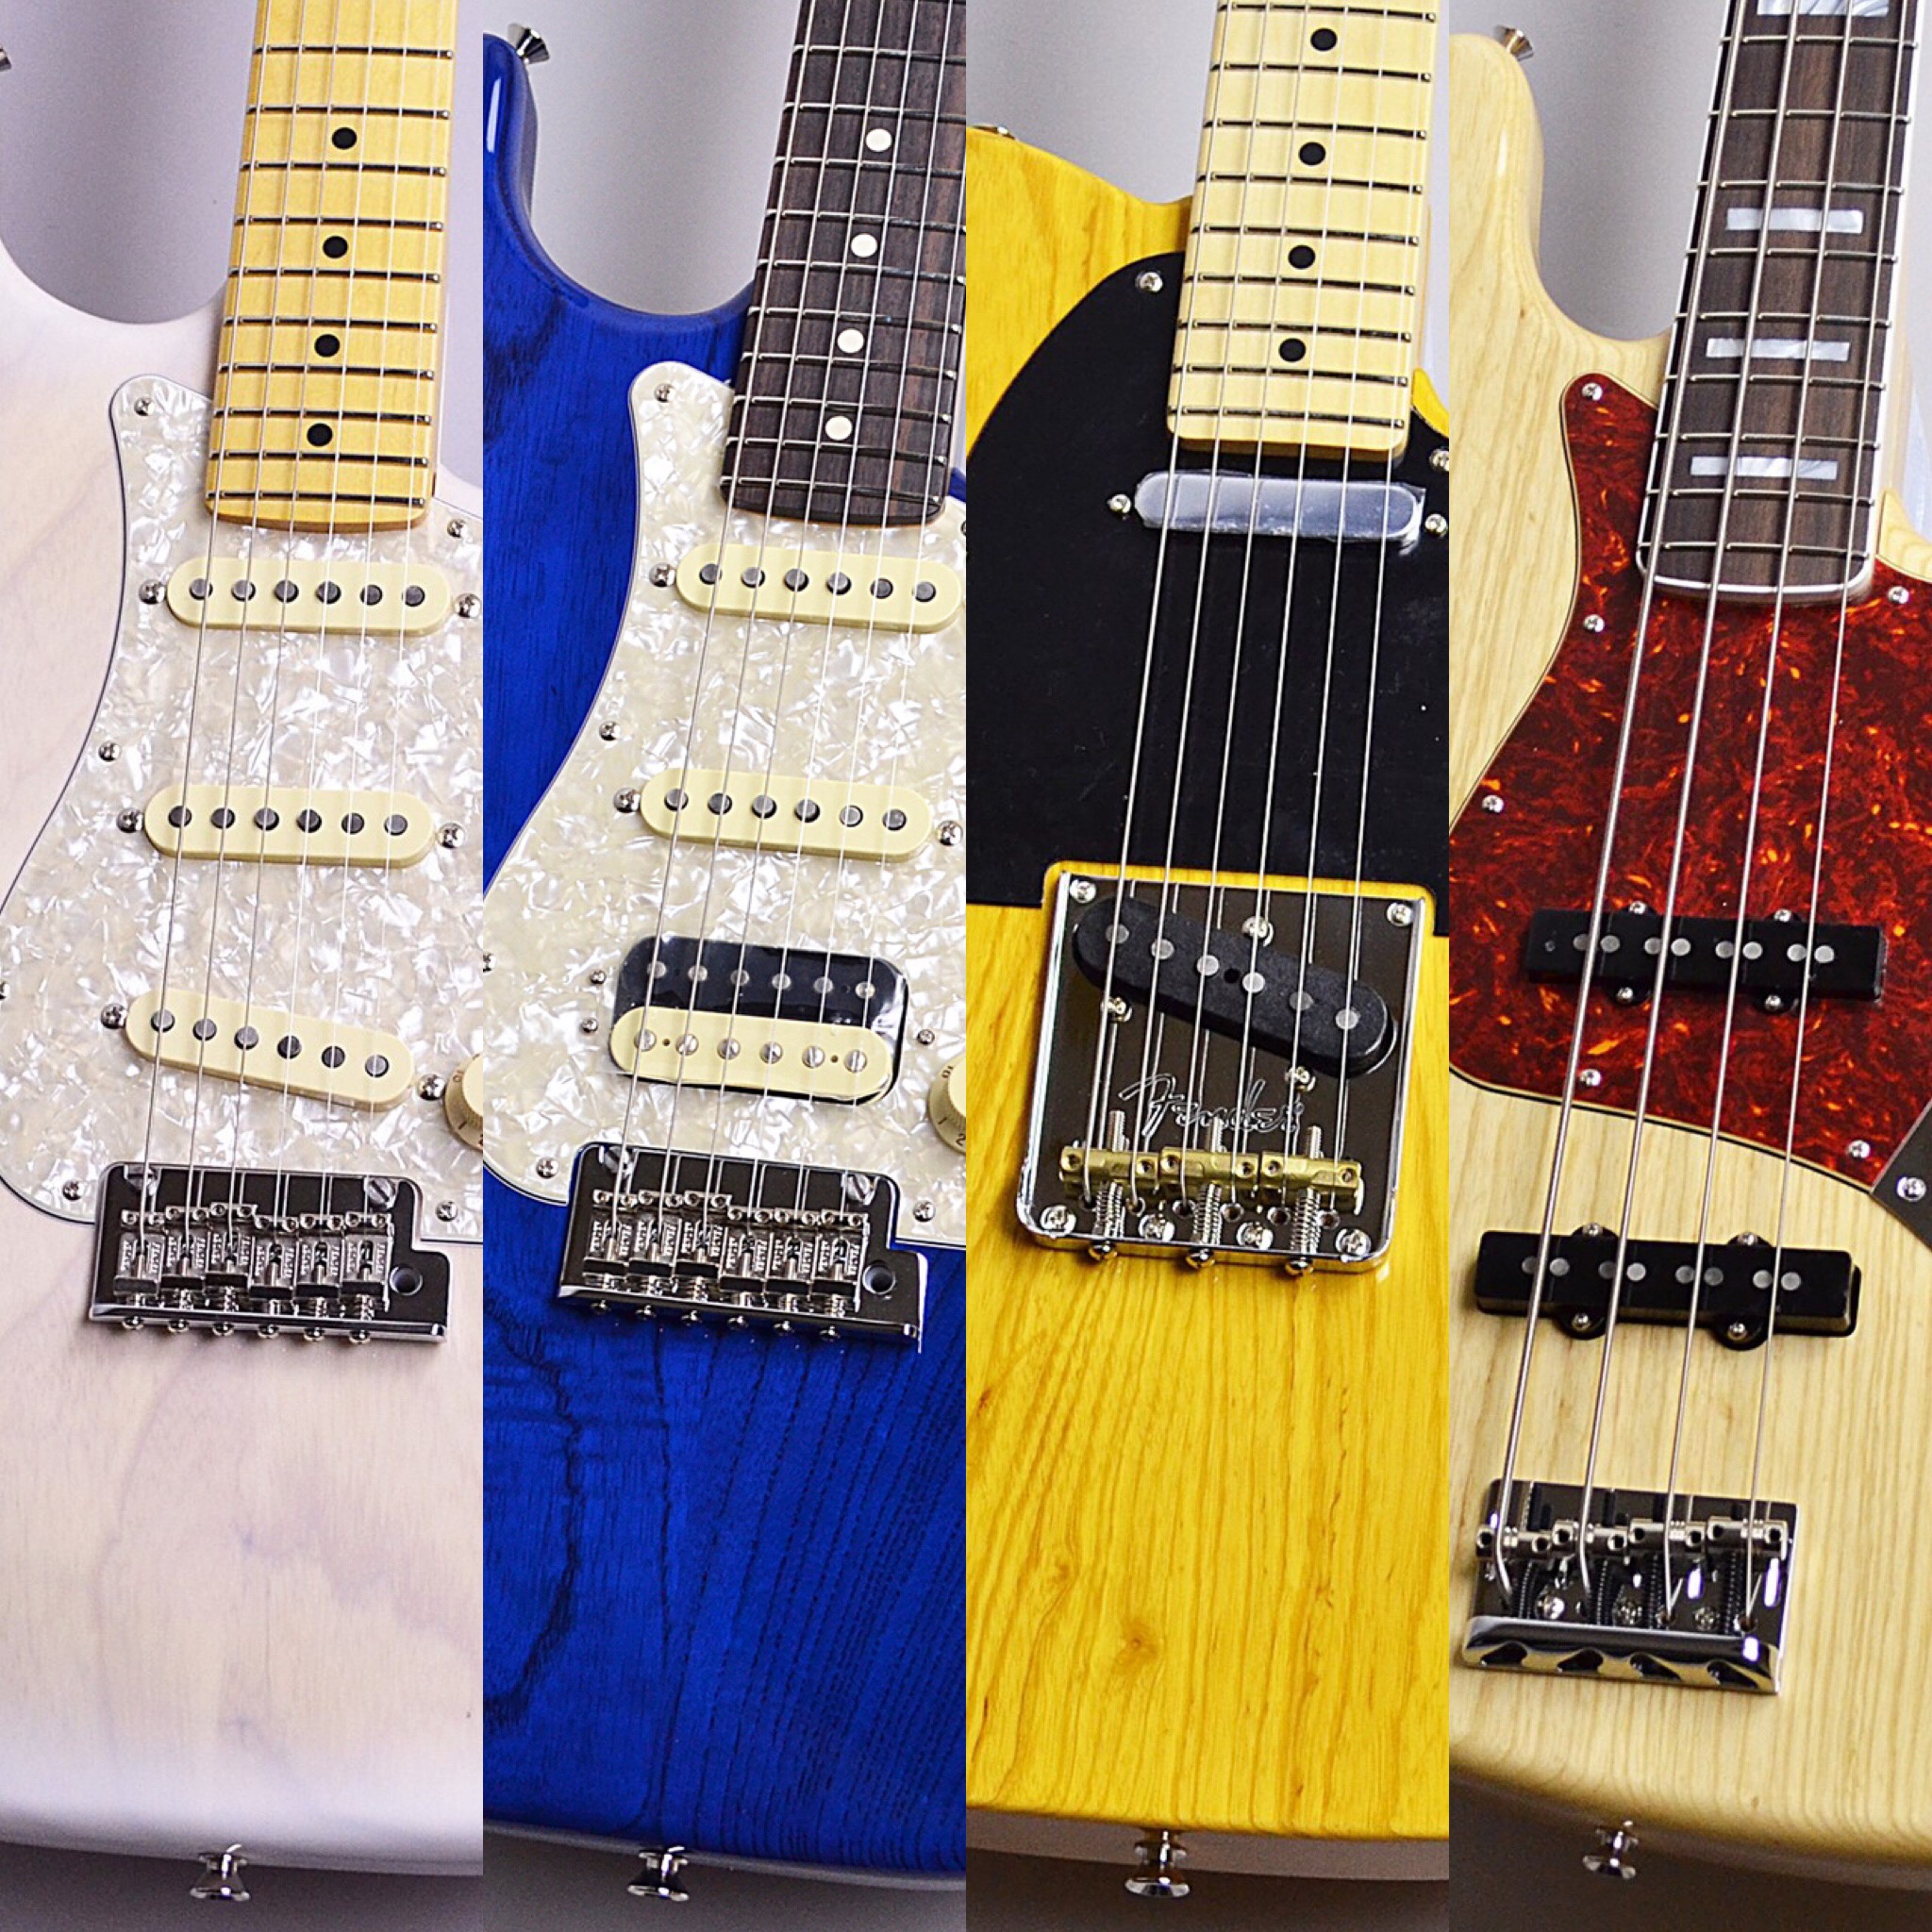 Fender『Made in Japan Limited Collection』2019年秋冬モデルを取り扱い中です！ - 八王子店 店舗情報